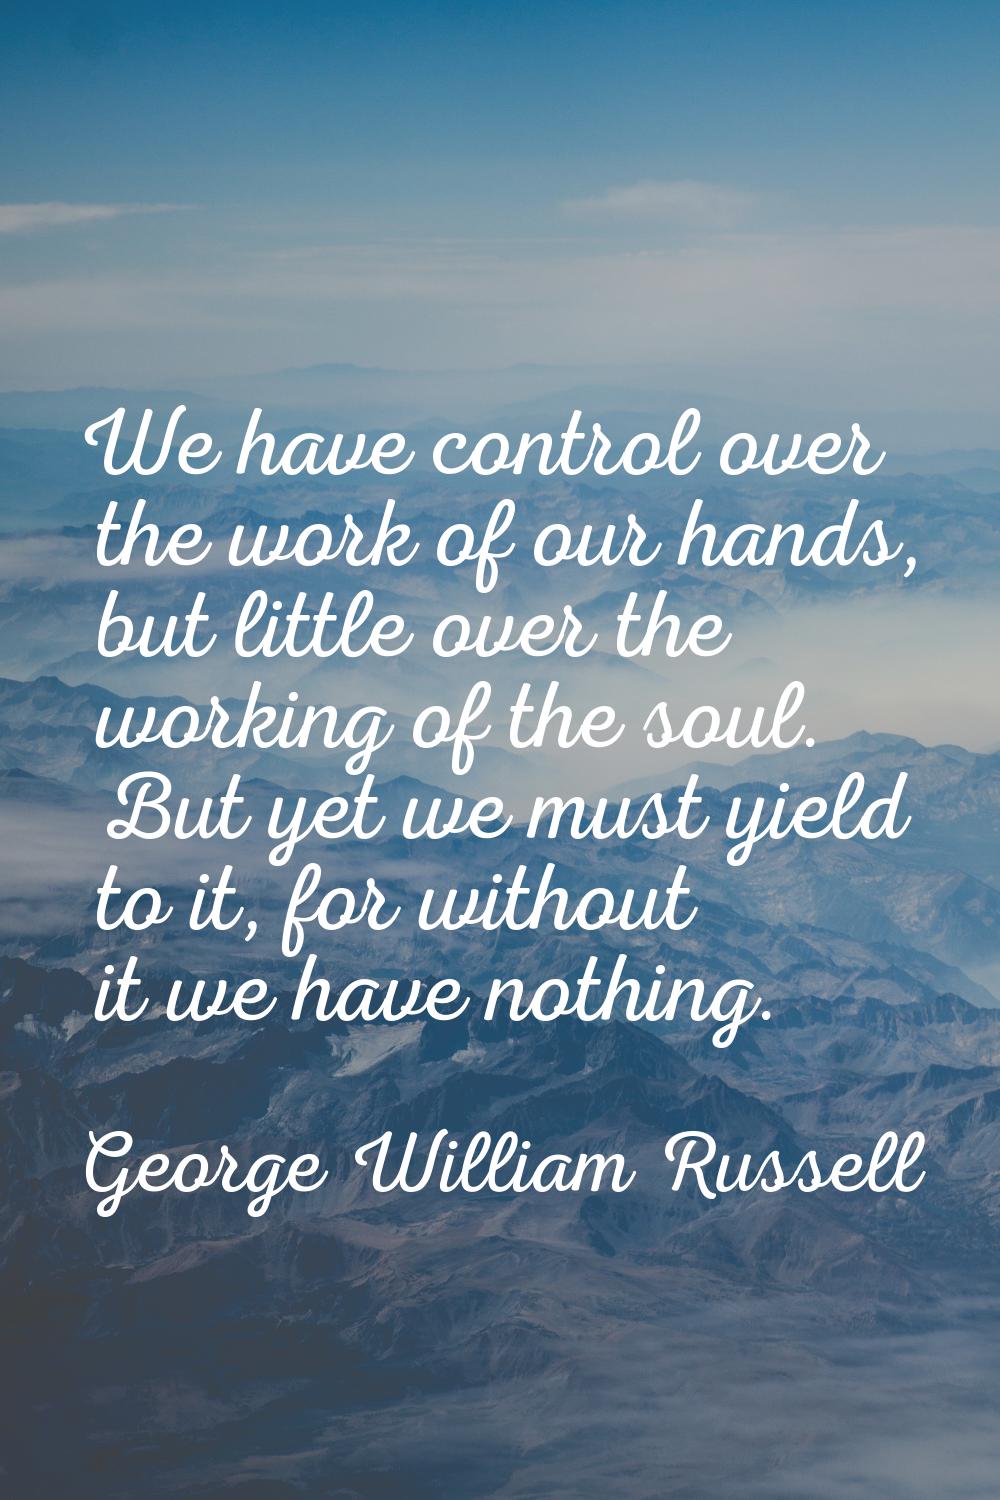 We have control over the work of our hands, but little over the working of the soul. But yet we mus